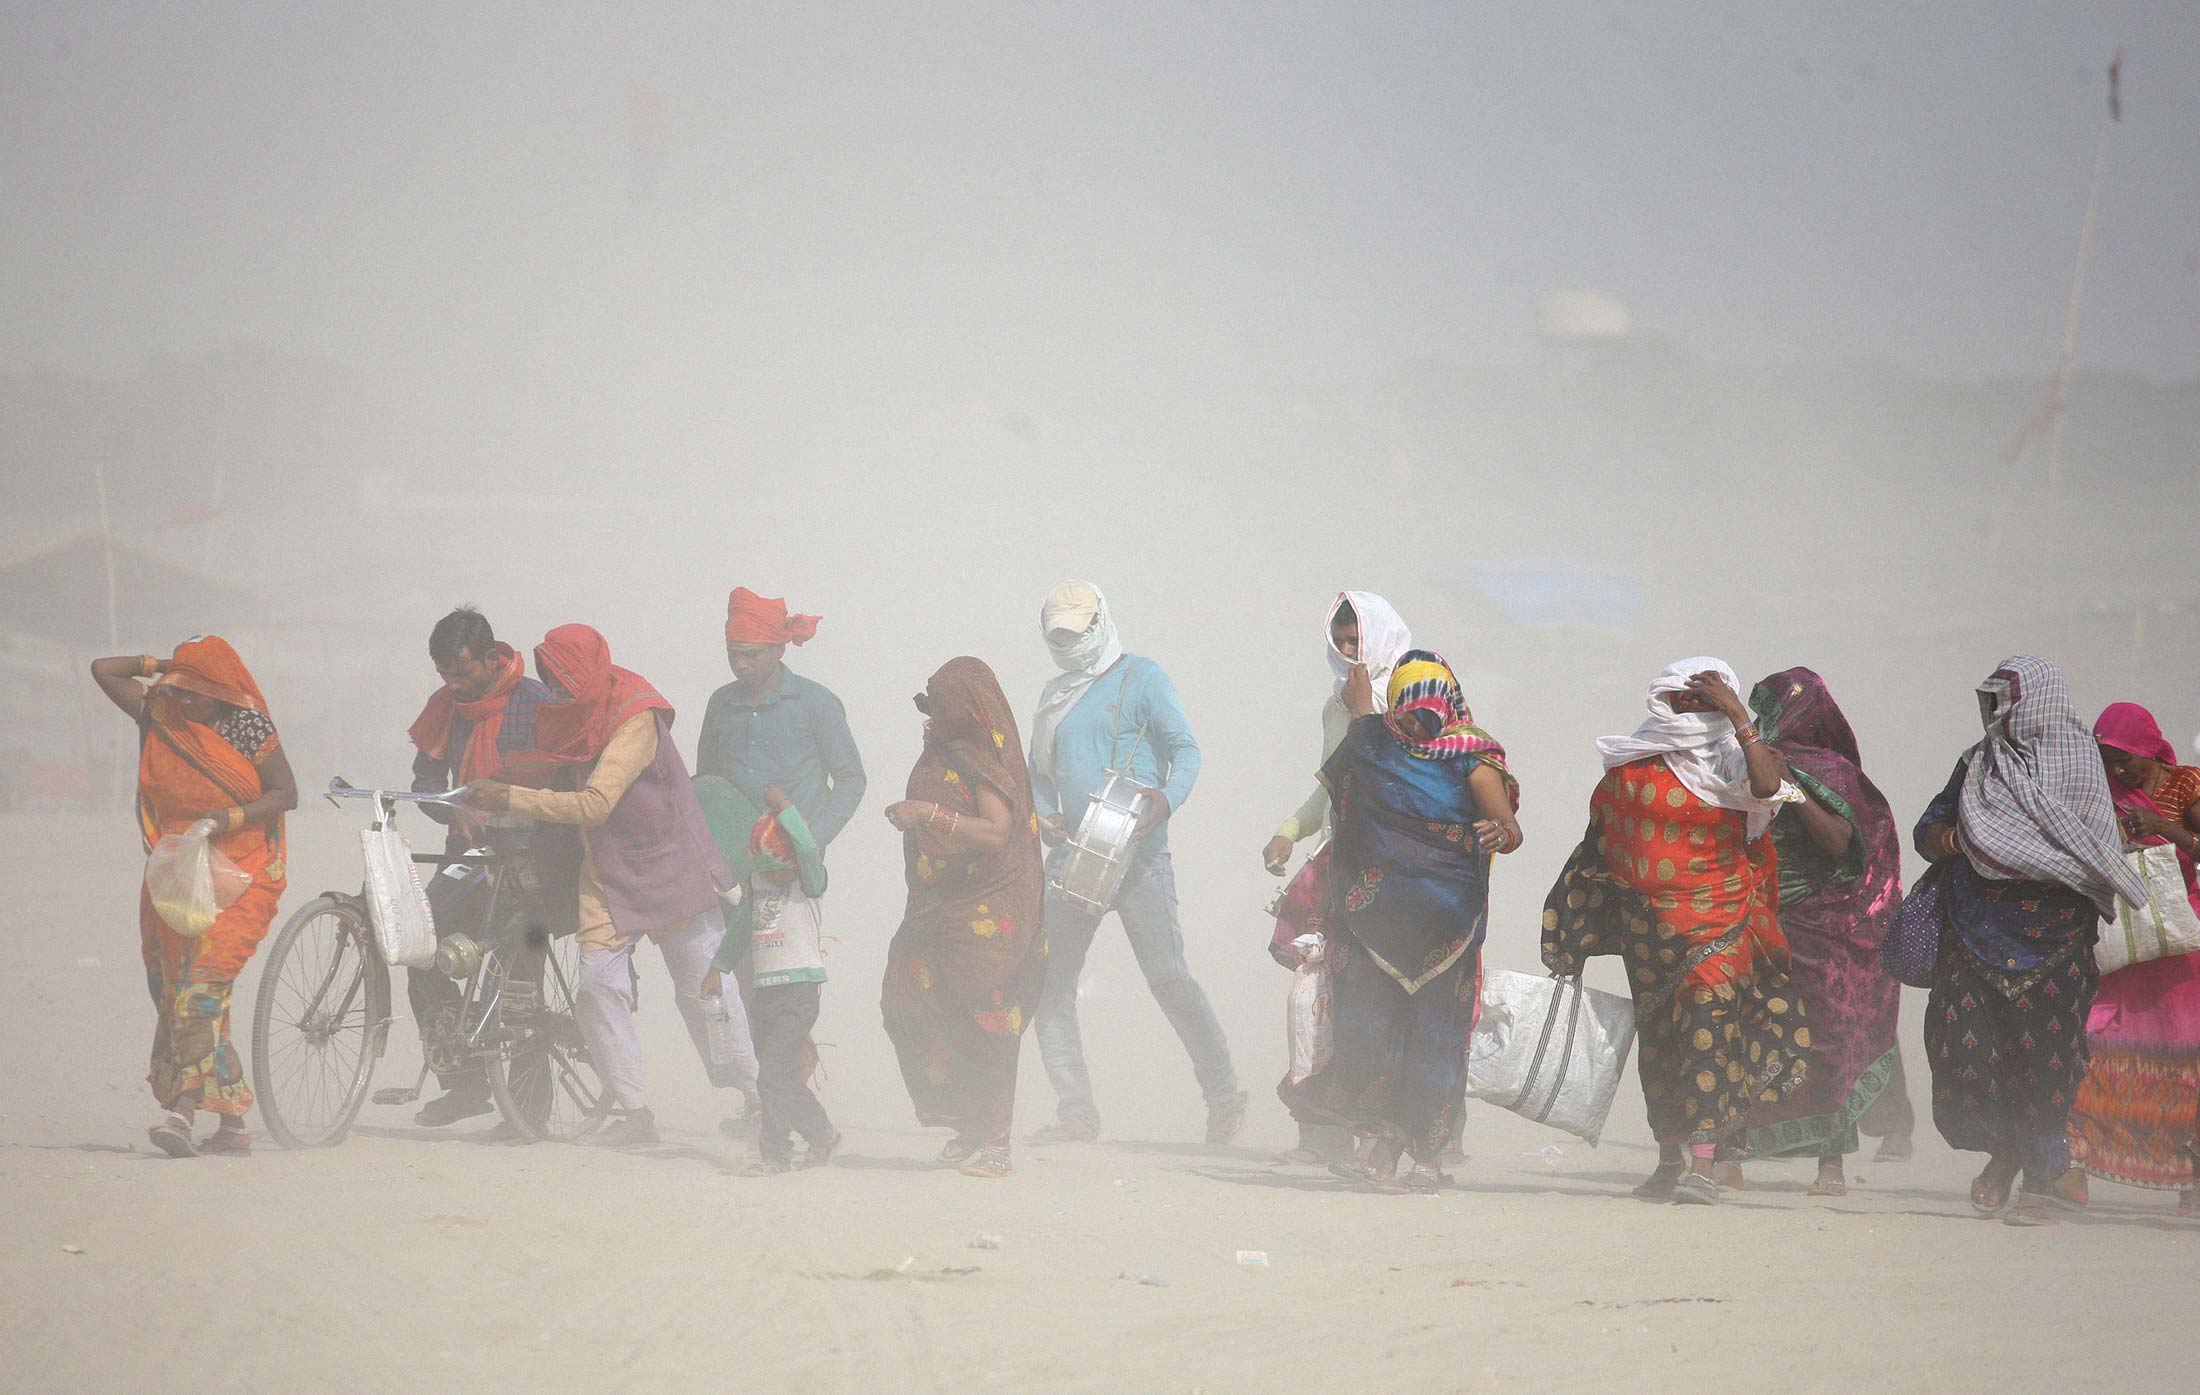 Commuters brave a heat wave&nbsp;in Allahabad&nbsp;in India’s Uttar Pradesh state on June 7.&nbsp;